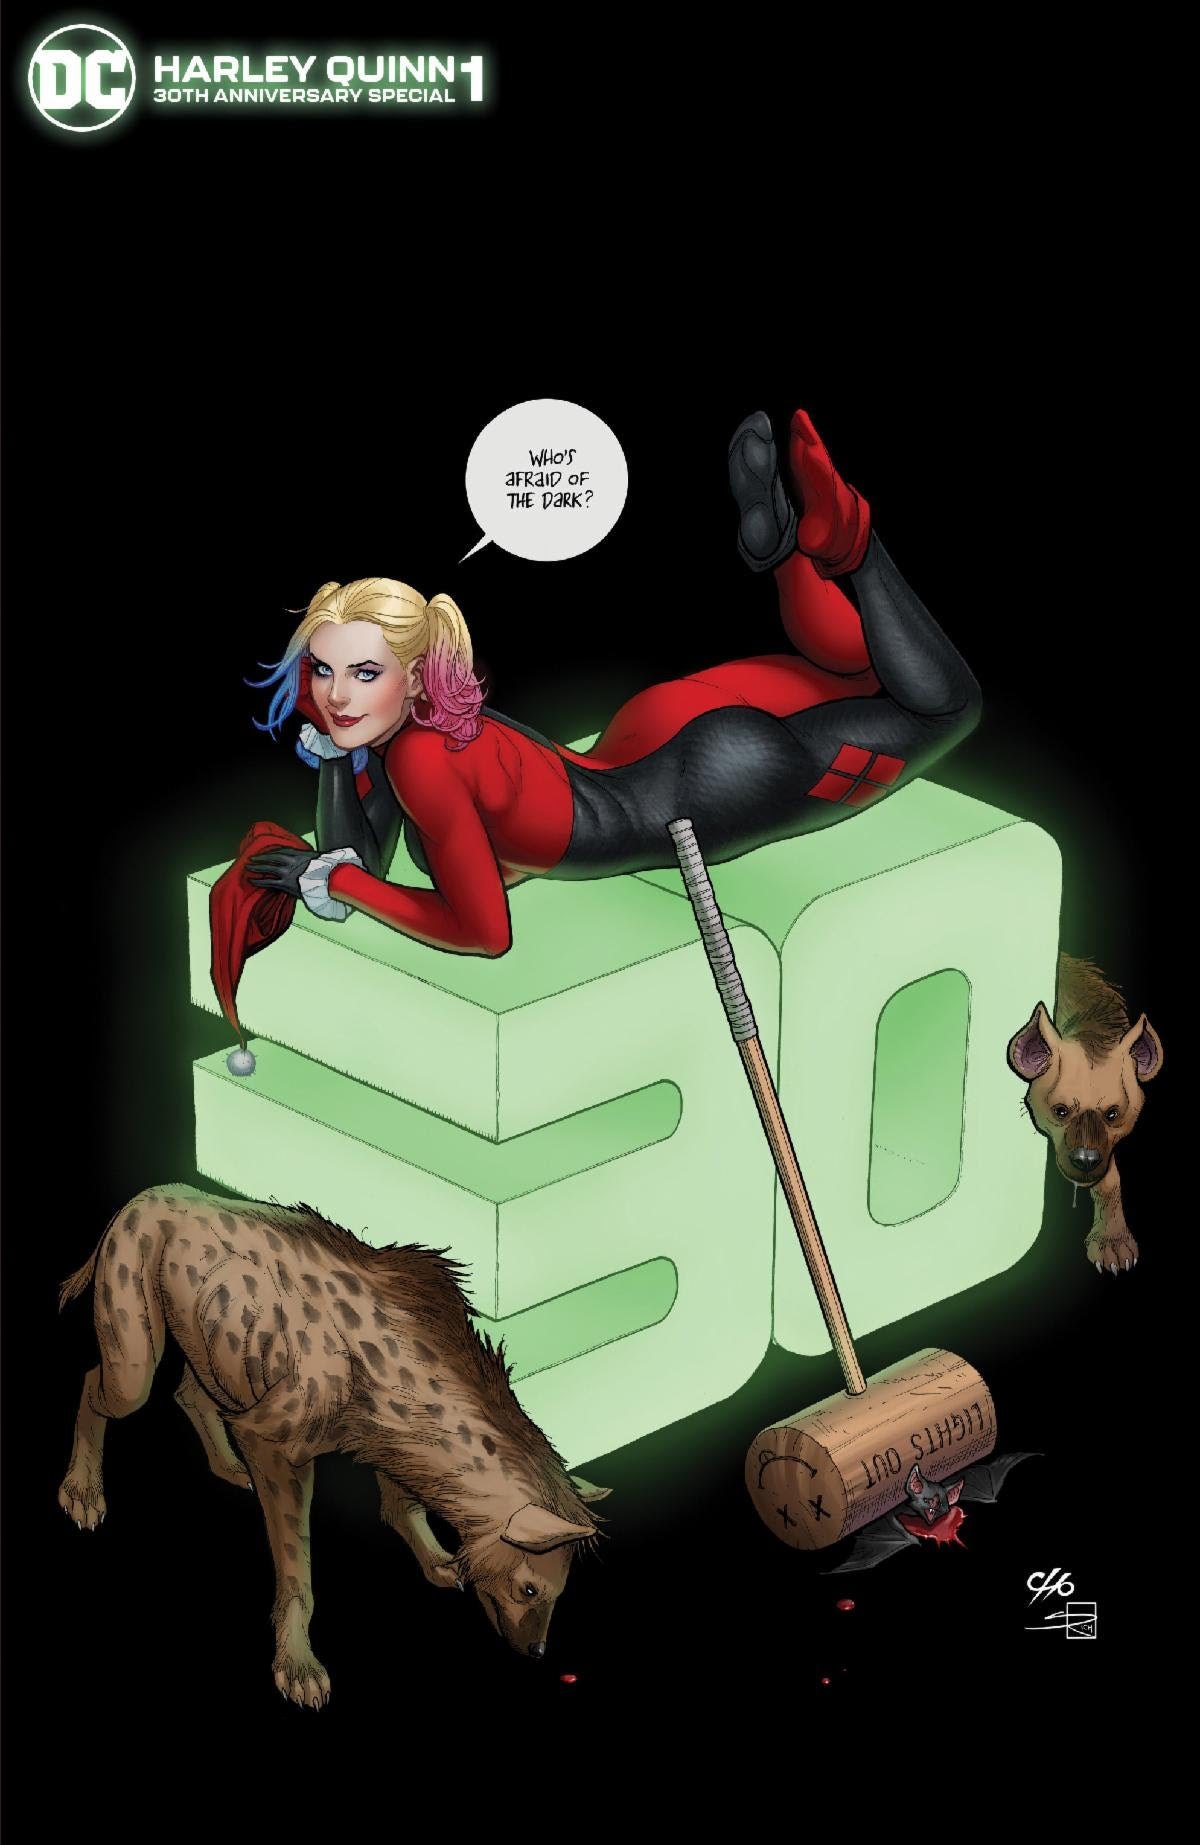 14/09/2022 HARLEY QUINN 30TH ANNIVERSARY SPECIAL #1 (ONE SHOT) 1:10 FRANK CHO GLOW IN THE DARK VARIANT